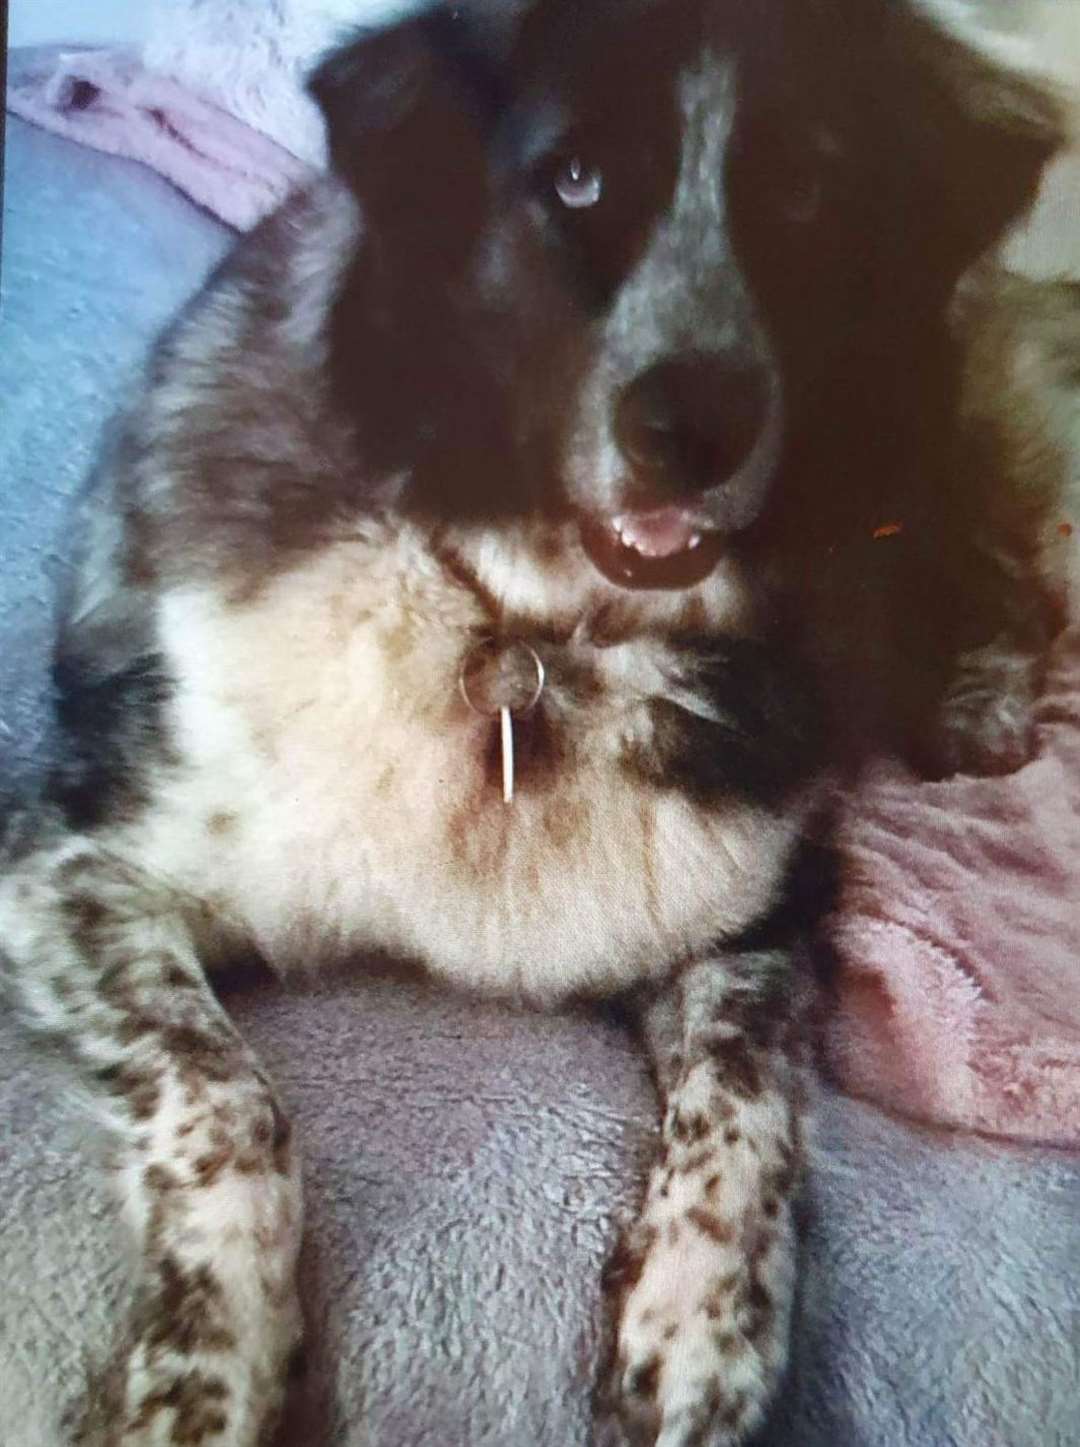 Rosa, who has been lost since her owner was hit by a car on Saturday, January 14